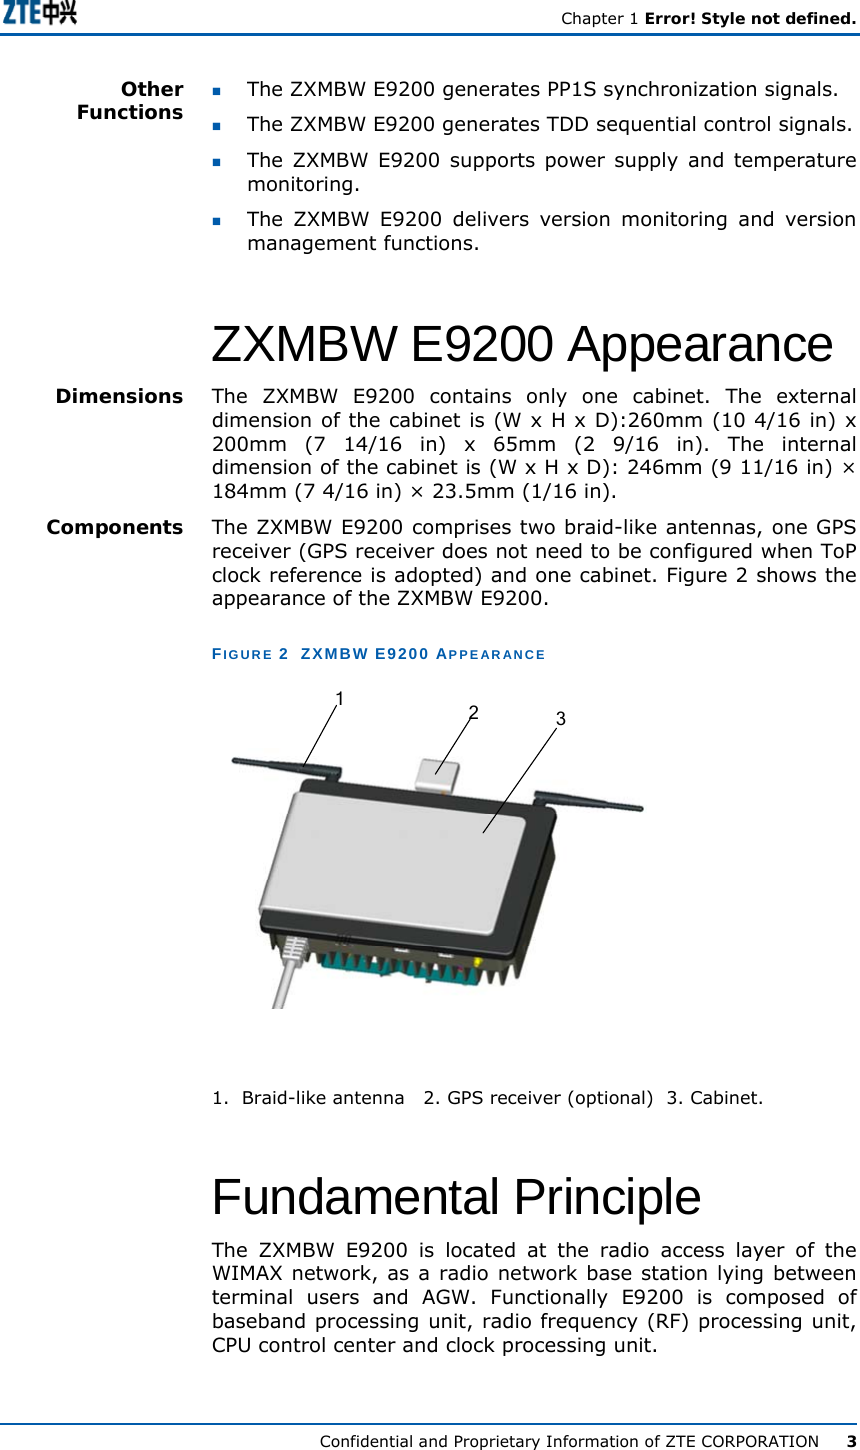   Chapter 1 Error! Style not defined.  Confidential and Proprietary Information of ZTE CORPORATION      3  The ZXMBW E9200 generates PP1S synchronization signals.   The ZXMBW E9200 generates TDD sequential control signals.  The ZXMBW E9200 supports power supply and temperature monitoring.  The ZXMBW E9200 delivers version monitoring and version management functions. ZXMBW E9200 Appearance The ZXMBW E9200 contains only one cabinet. The external dimension of the cabinet is (W x H x D):260mm (10 4/16 in) x 200mm (7 14/16 in) x 65mm (2 9/16 in). The internal dimension of the cabinet is (W x H x D): 246mm (9 11/16 in) × 184mm (7 4/16 in) × 23.5mm (1/16 in). The ZXMBW E9200 comprises two braid-like antennas, one GPS receiver (GPS receiver does not need to be configured when ToP clock reference is adopted) and one cabinet. Figure 2 shows the appearance of the ZXMBW E9200. FIGURE 2  ZXMBW E9200 APPEARANCE 123 1.  Braid-like antenna  2. GPS receiver (optional)  3. Cabinet. Fundamental Principle The ZXMBW E9200 is located at the radio access layer of the WIMAX network, as a radio network base station lying between terminal users and AGW. Functionally E9200 is composed of baseband processing unit, radio frequency (RF) processing unit, CPU control center and clock processing unit.   Other Functions Dimensions Components 